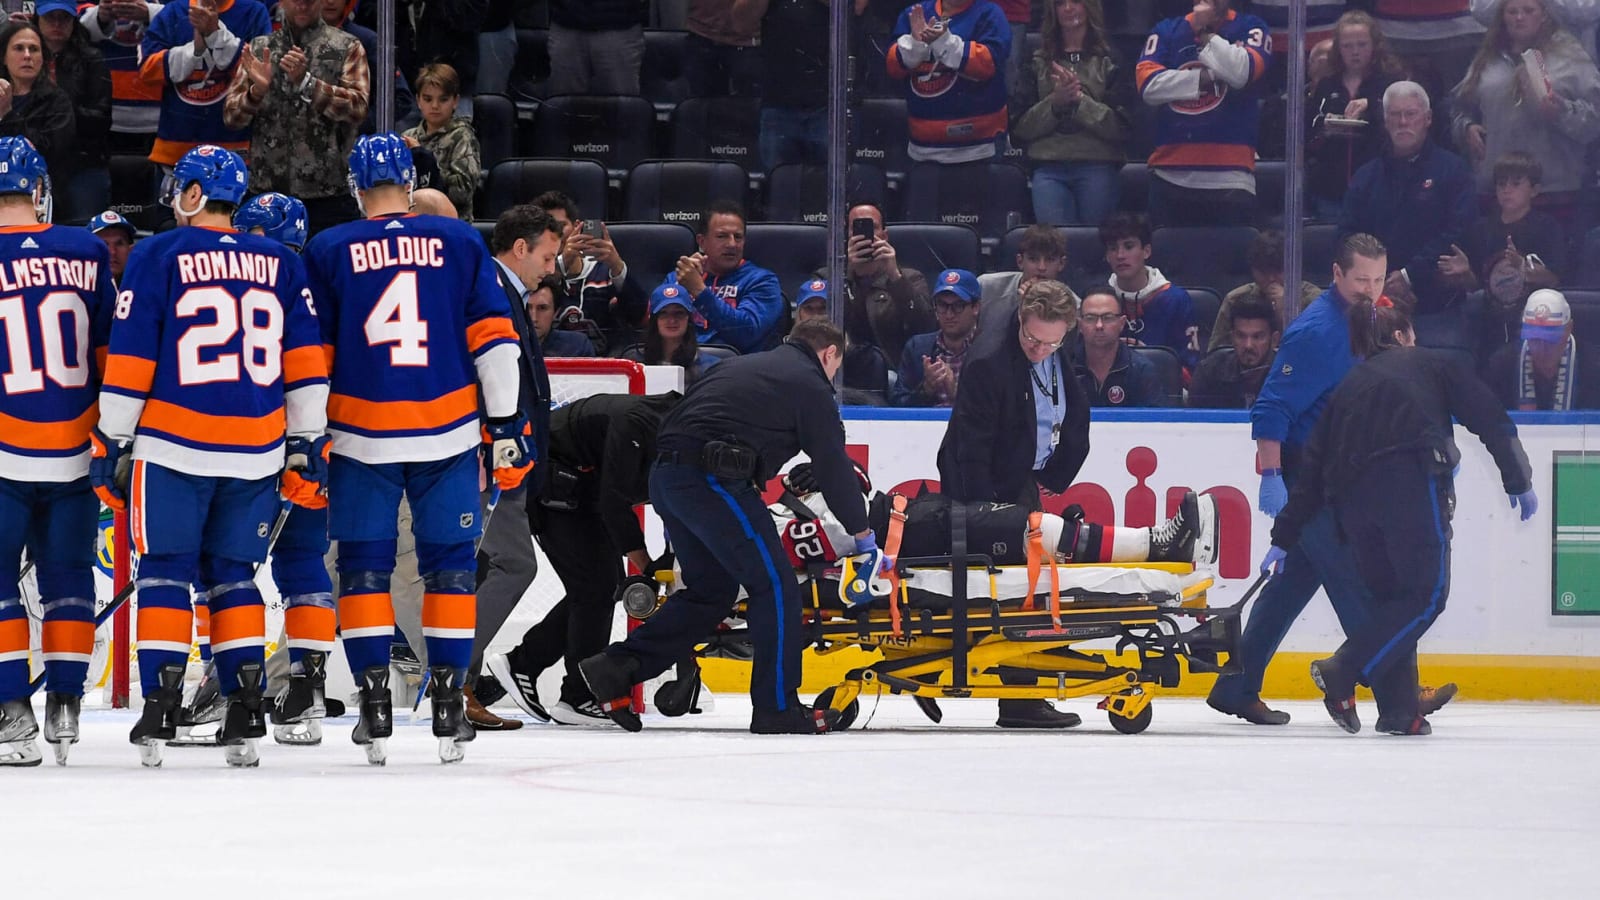 Senators give positive update on defenseman who exited on stretcher